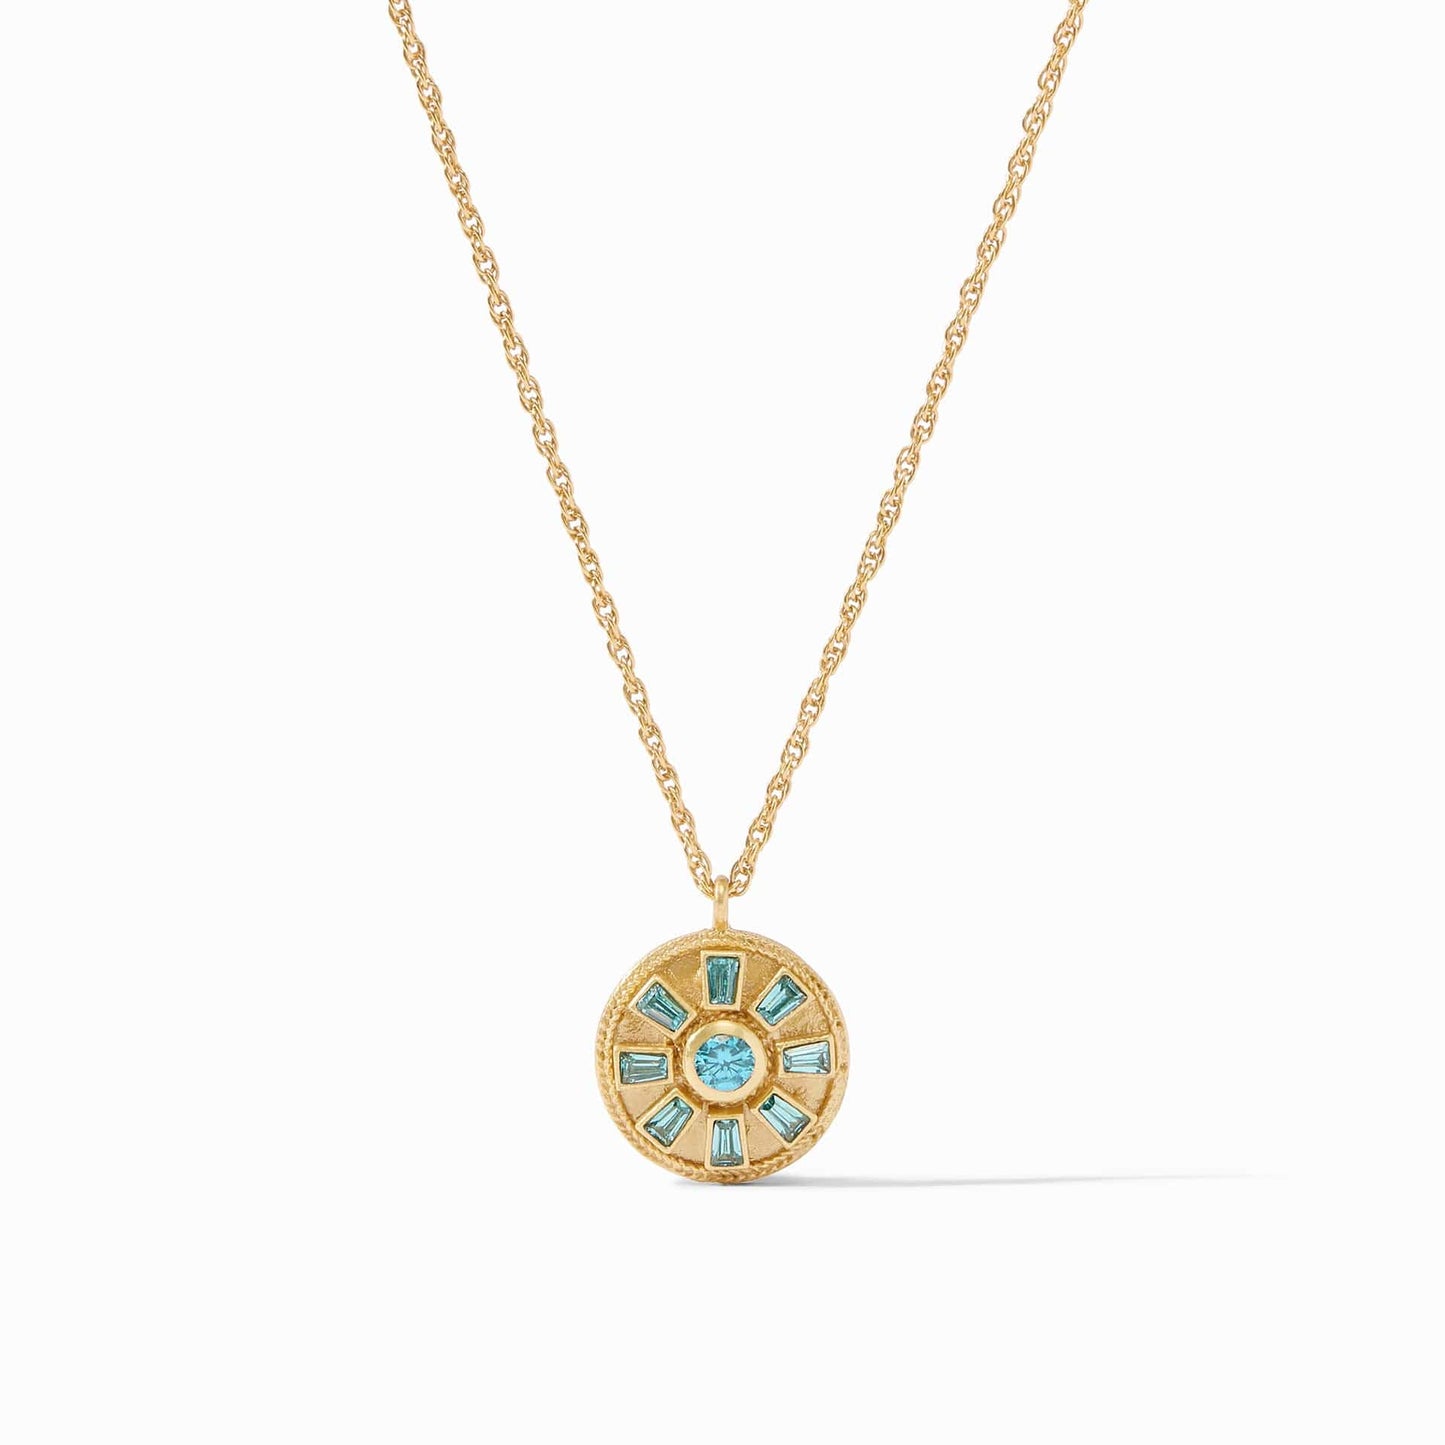 NKL-GPL Aurora Solitaire Necklace in Bahamian Blue